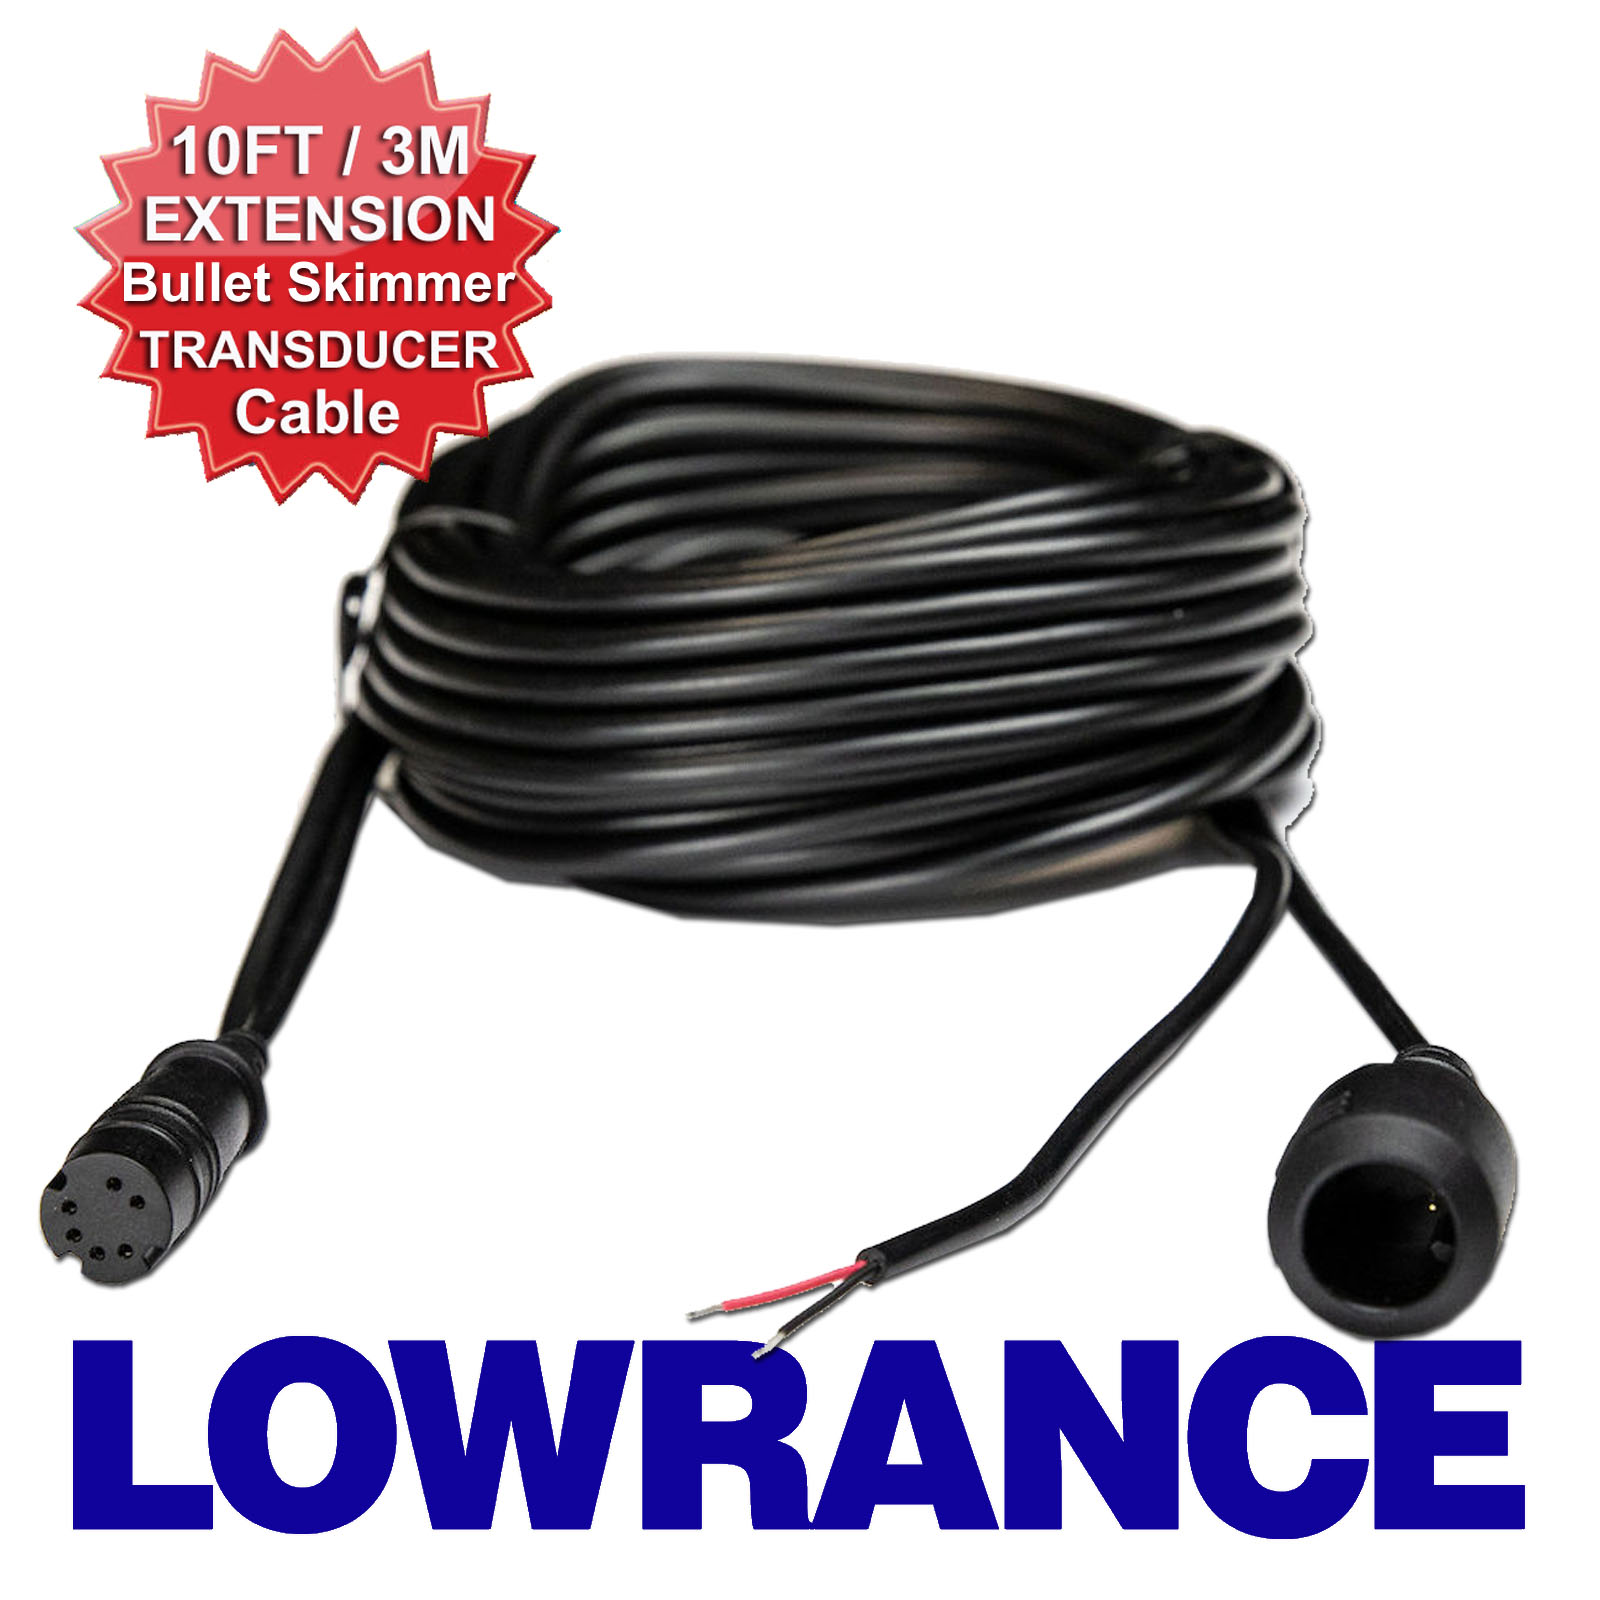 Lowrance Hook 2 4 & 4X 10ft Extension Cable for Bullet Skimmer Transducers  Part#: 000-14413-001